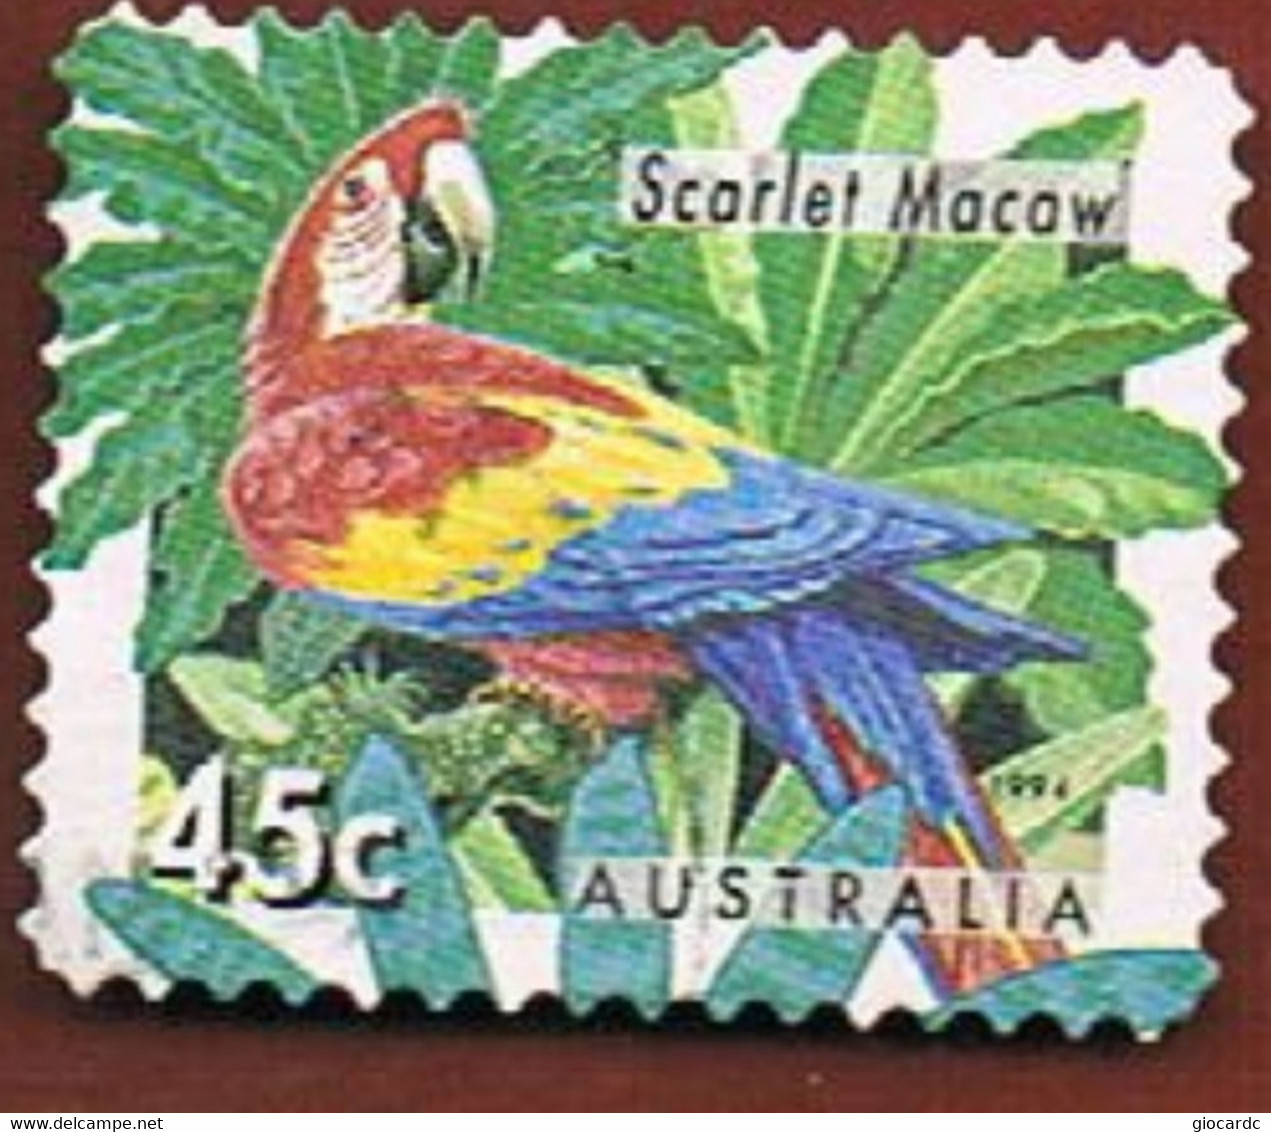 AUSTRALIA  -  SG 1485  -      1994  BIRDS: SCARLET MACAW   -       USED - Used Stamps